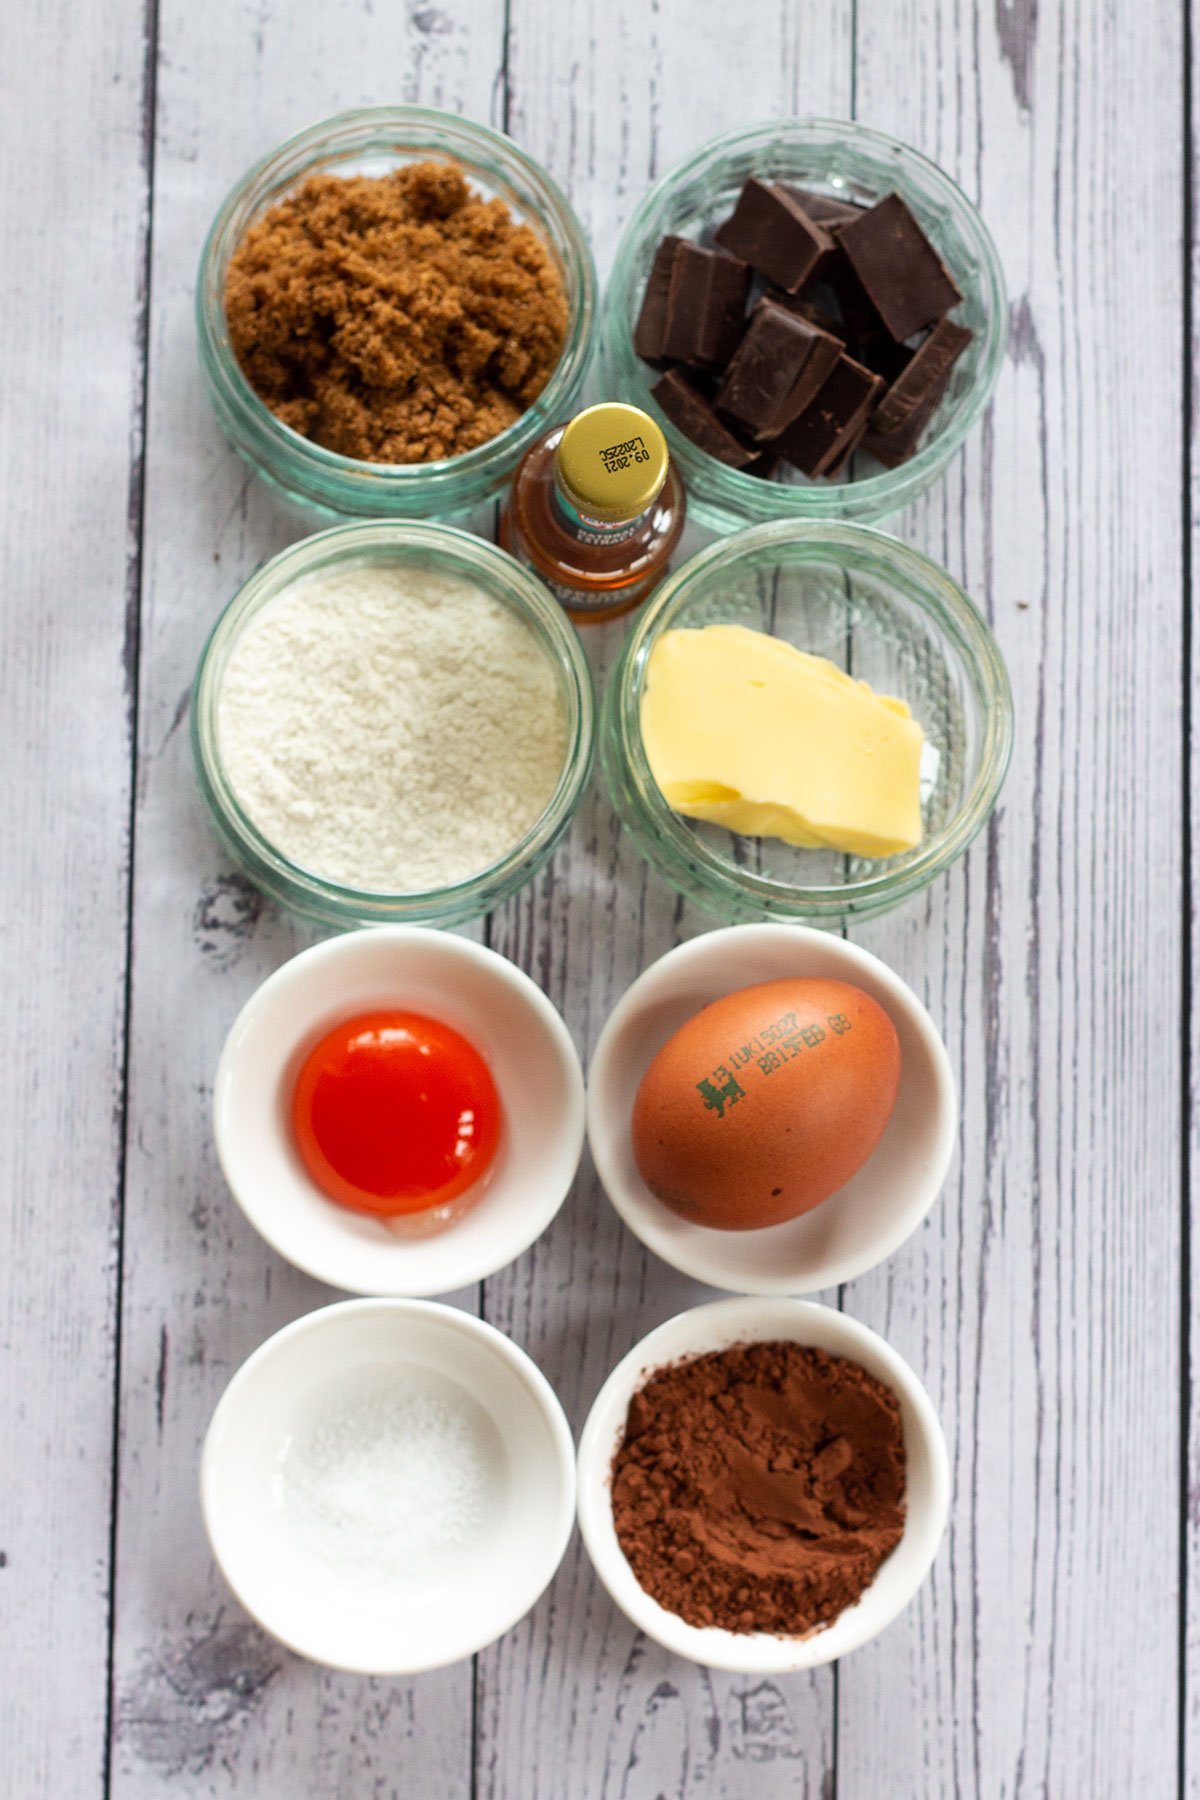 Recipe ingredients on a white background.